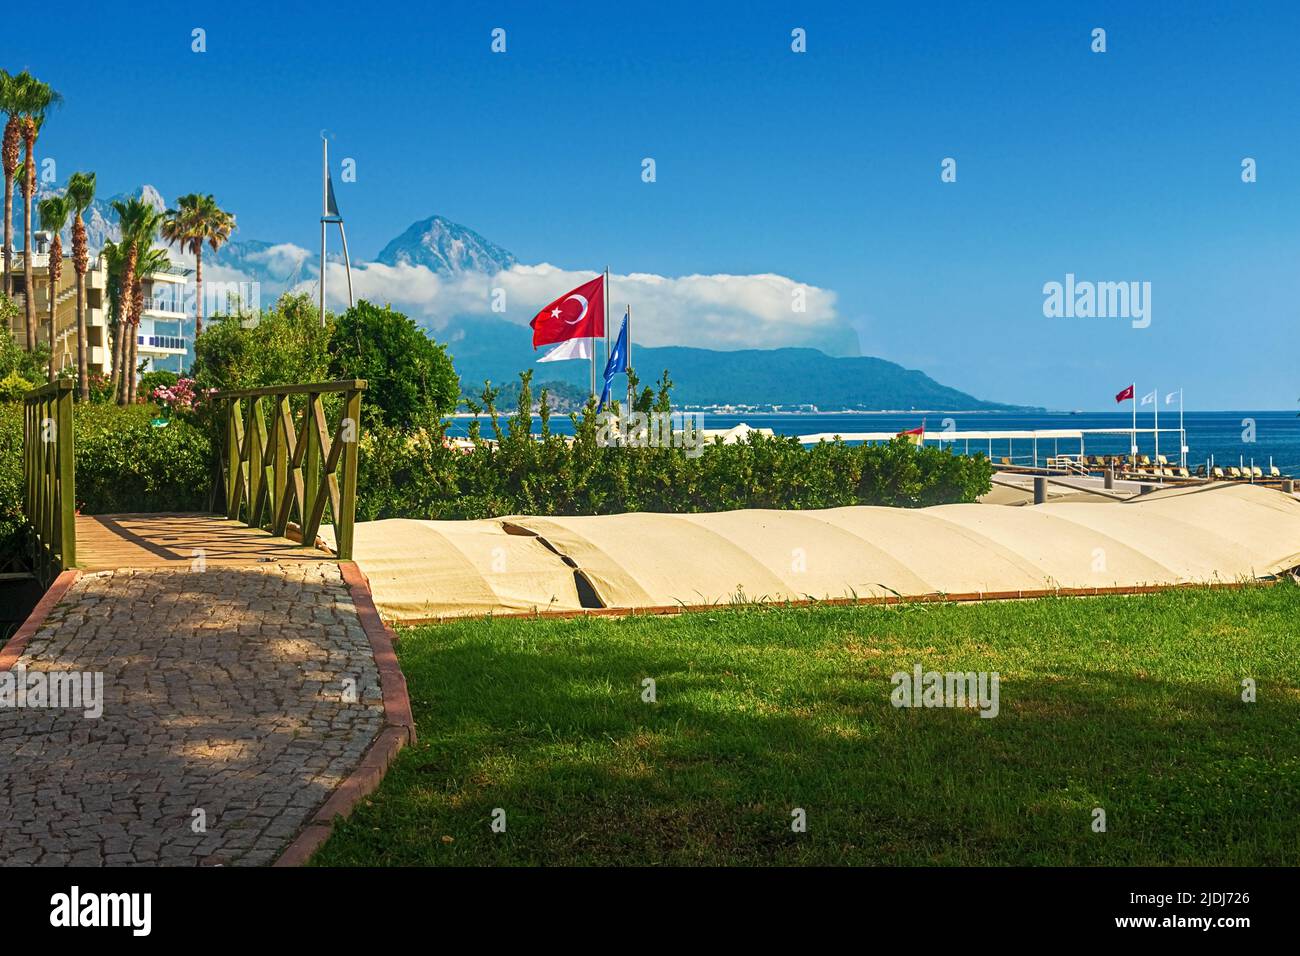 View of the path and the bridge in a green garden with green trees along the embankment in Kemer, Turkey. Stock Photo